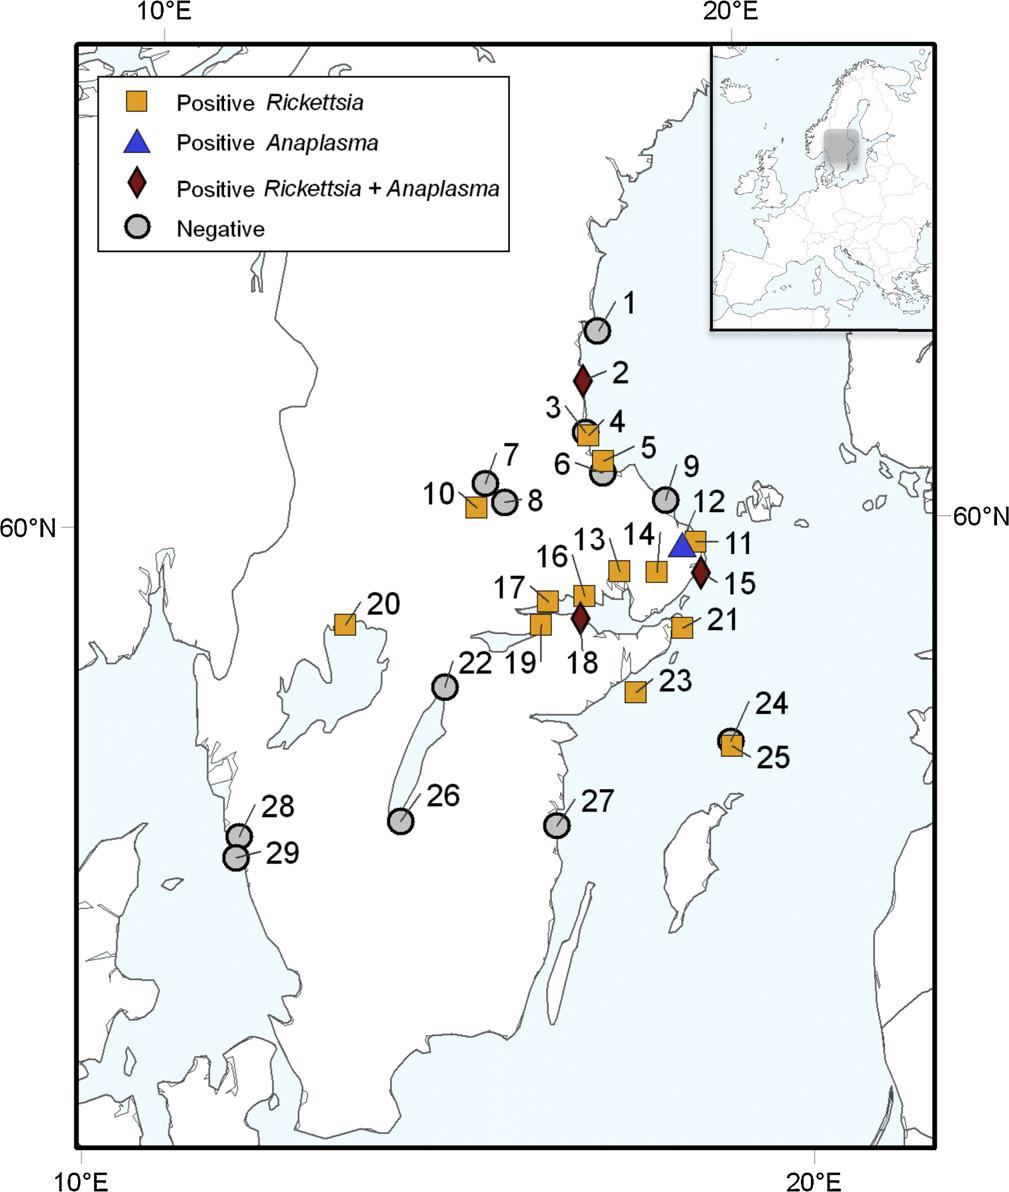 K. Wallménius et al. / Ticks and Tick-borne Diseases 3 (2012) 100 106 103 Fig. 1. Tick sampling localities in Sweden in order from north to south. Names of the localities are listed in Table 1.